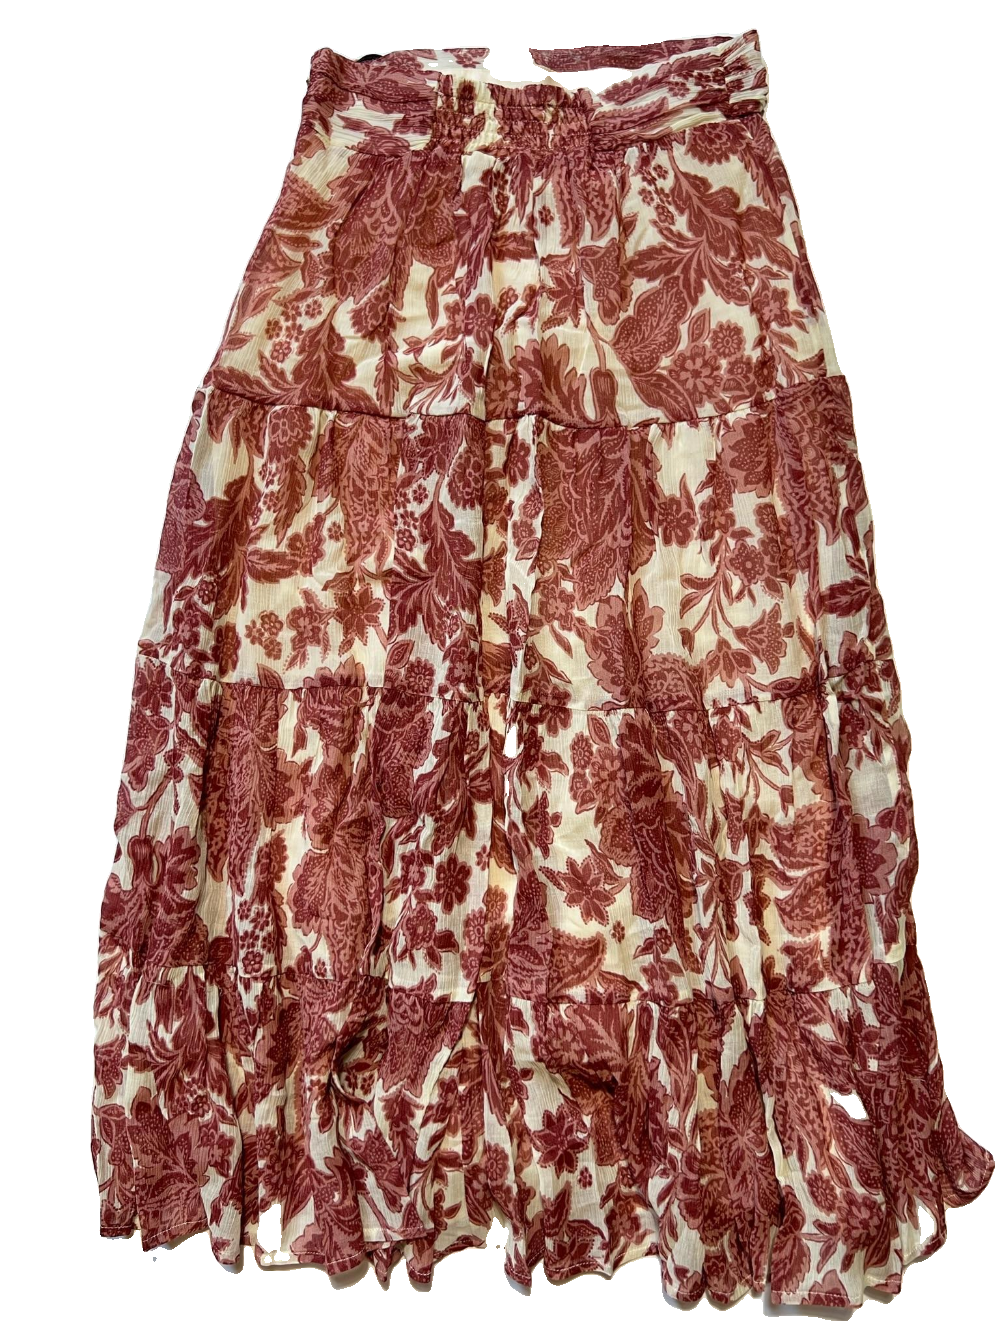 ba&sh - Maroon and Beige Floral Maxi Skirt - NEW WITH TAGS